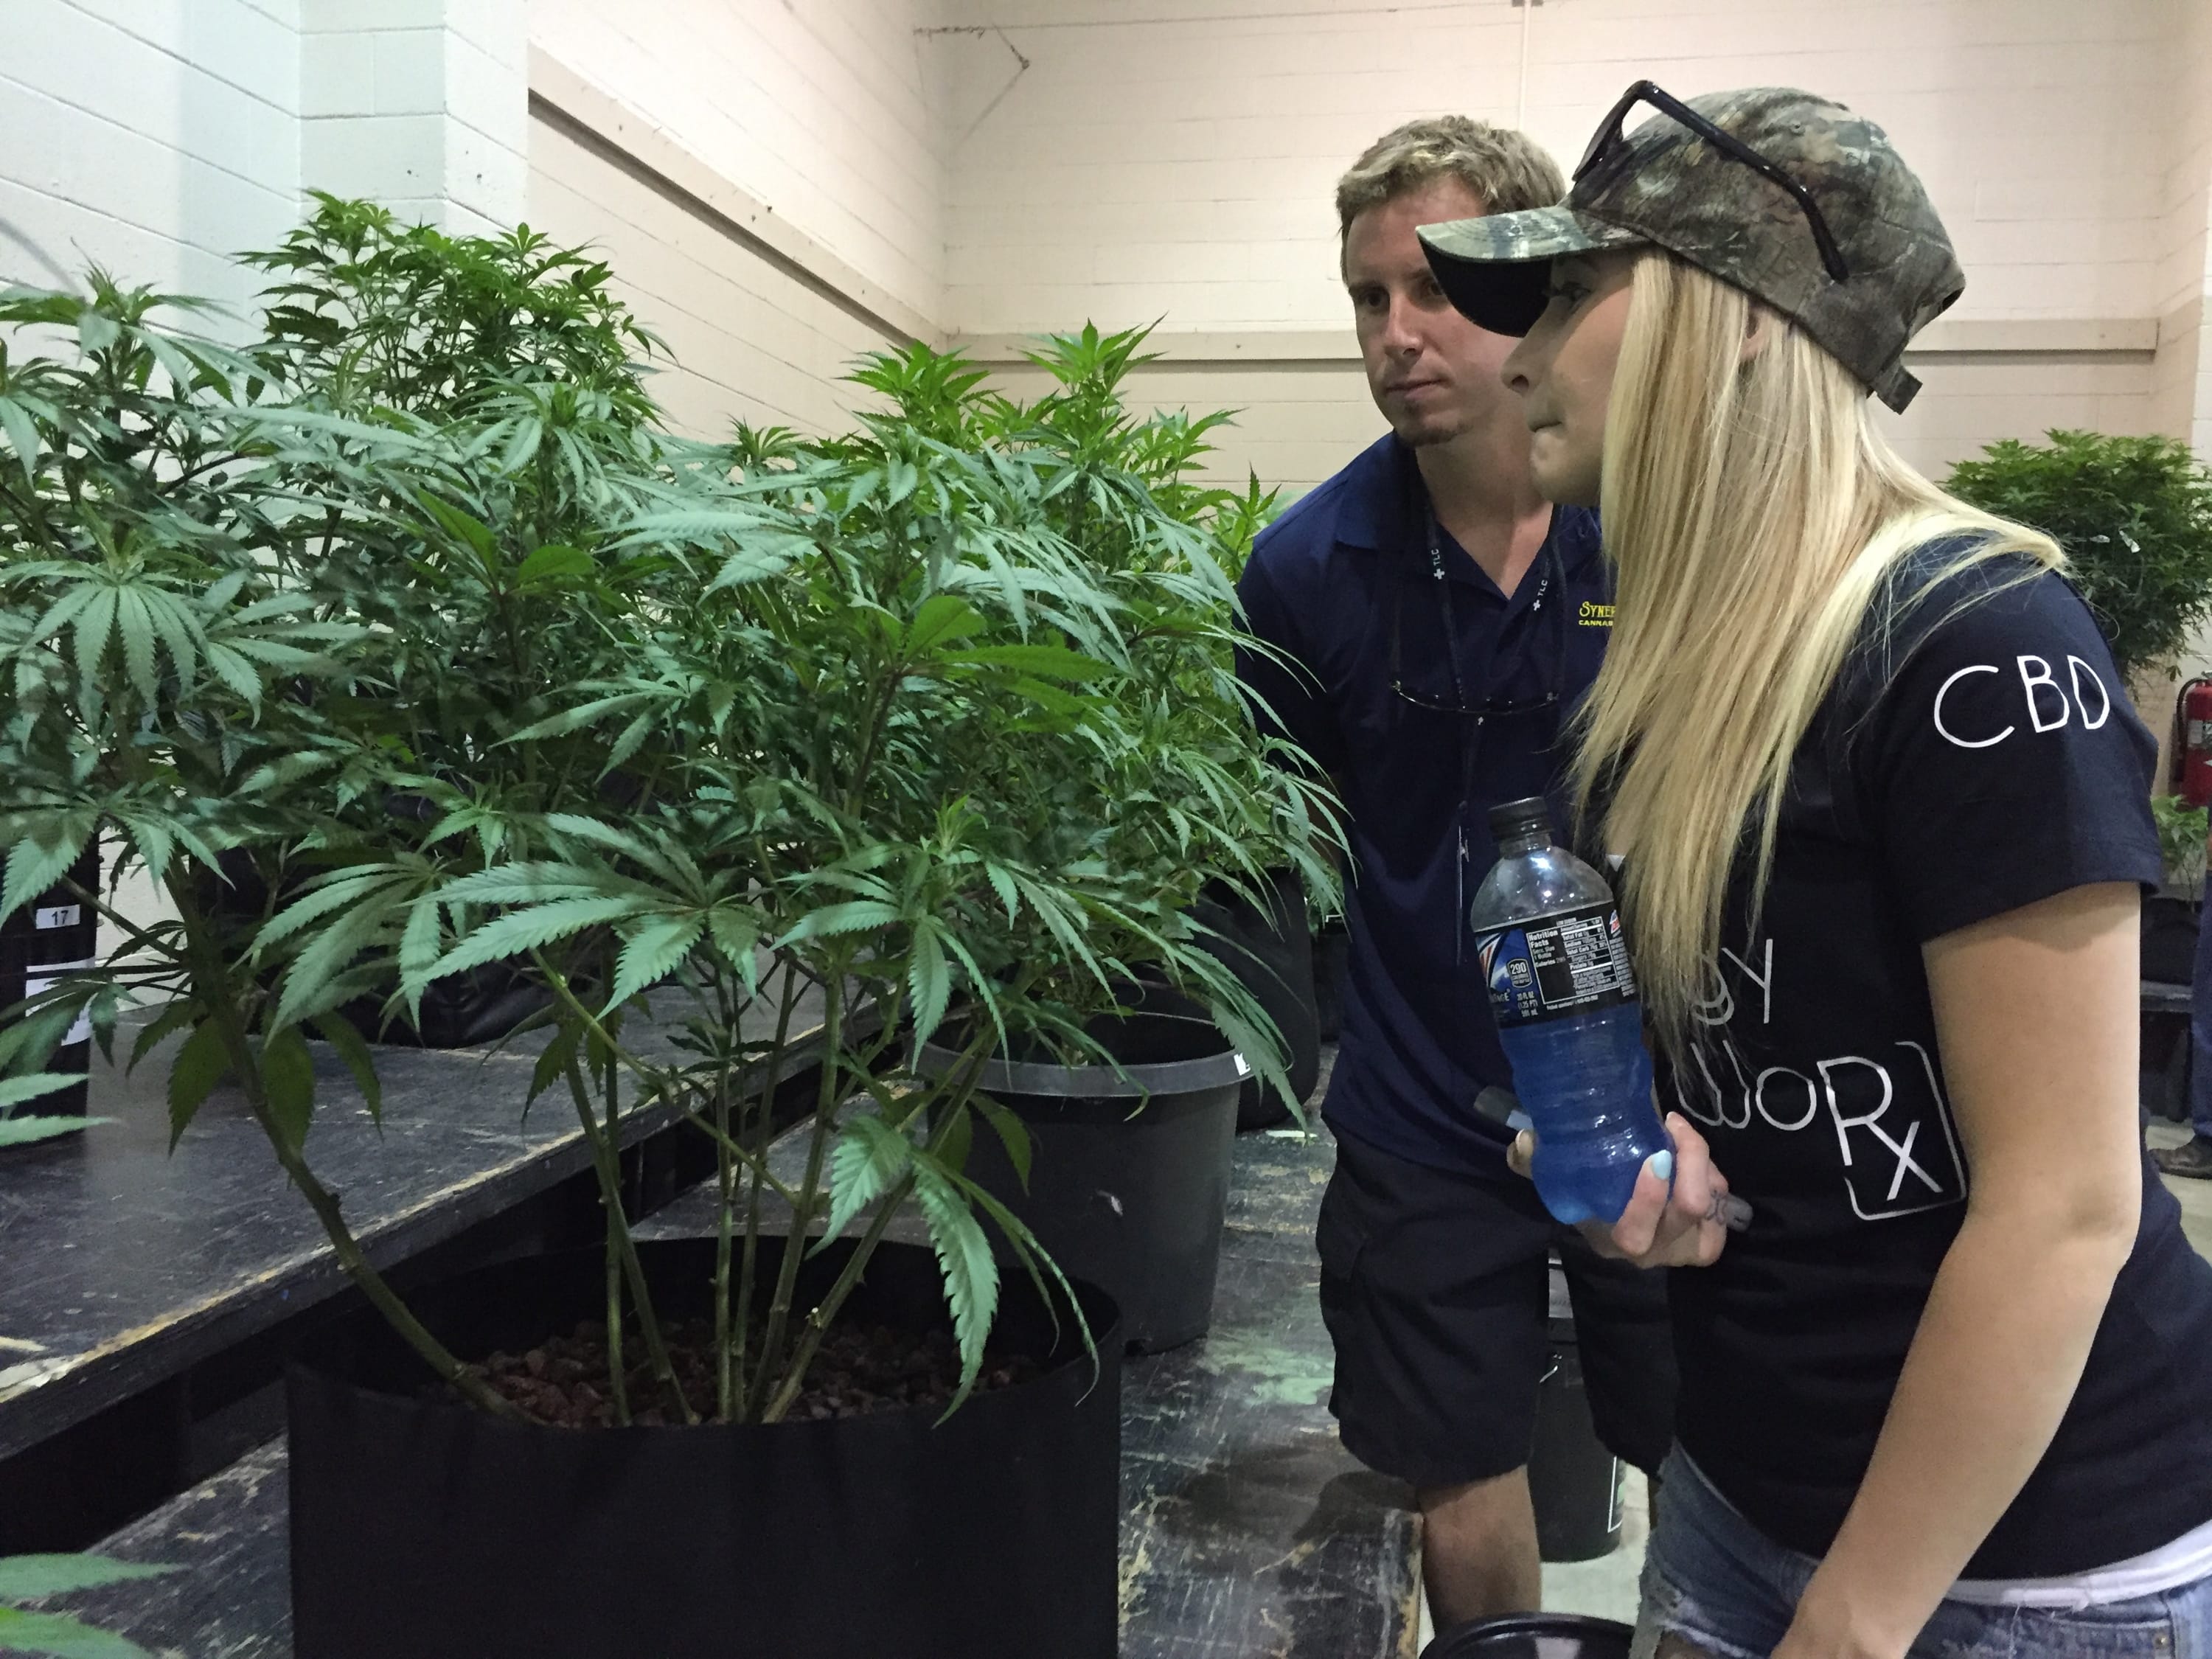 Greg Seybert, head farmer at marijuana grower Synergy Farms in Carver, Ore., inspects a marijuana plant with his girlfriend, Samantha Aune in Salem, Ore.,  Saturday, Aug. 13, 2016. In a sign of how mainstream the once-illicit marijuana industry is becoming in Oregon, one of four states to have legalized it, exhibitors are heading to the state capital to set up for the inaugural Oregon Cannabis Grower's Fair running through the weekend.